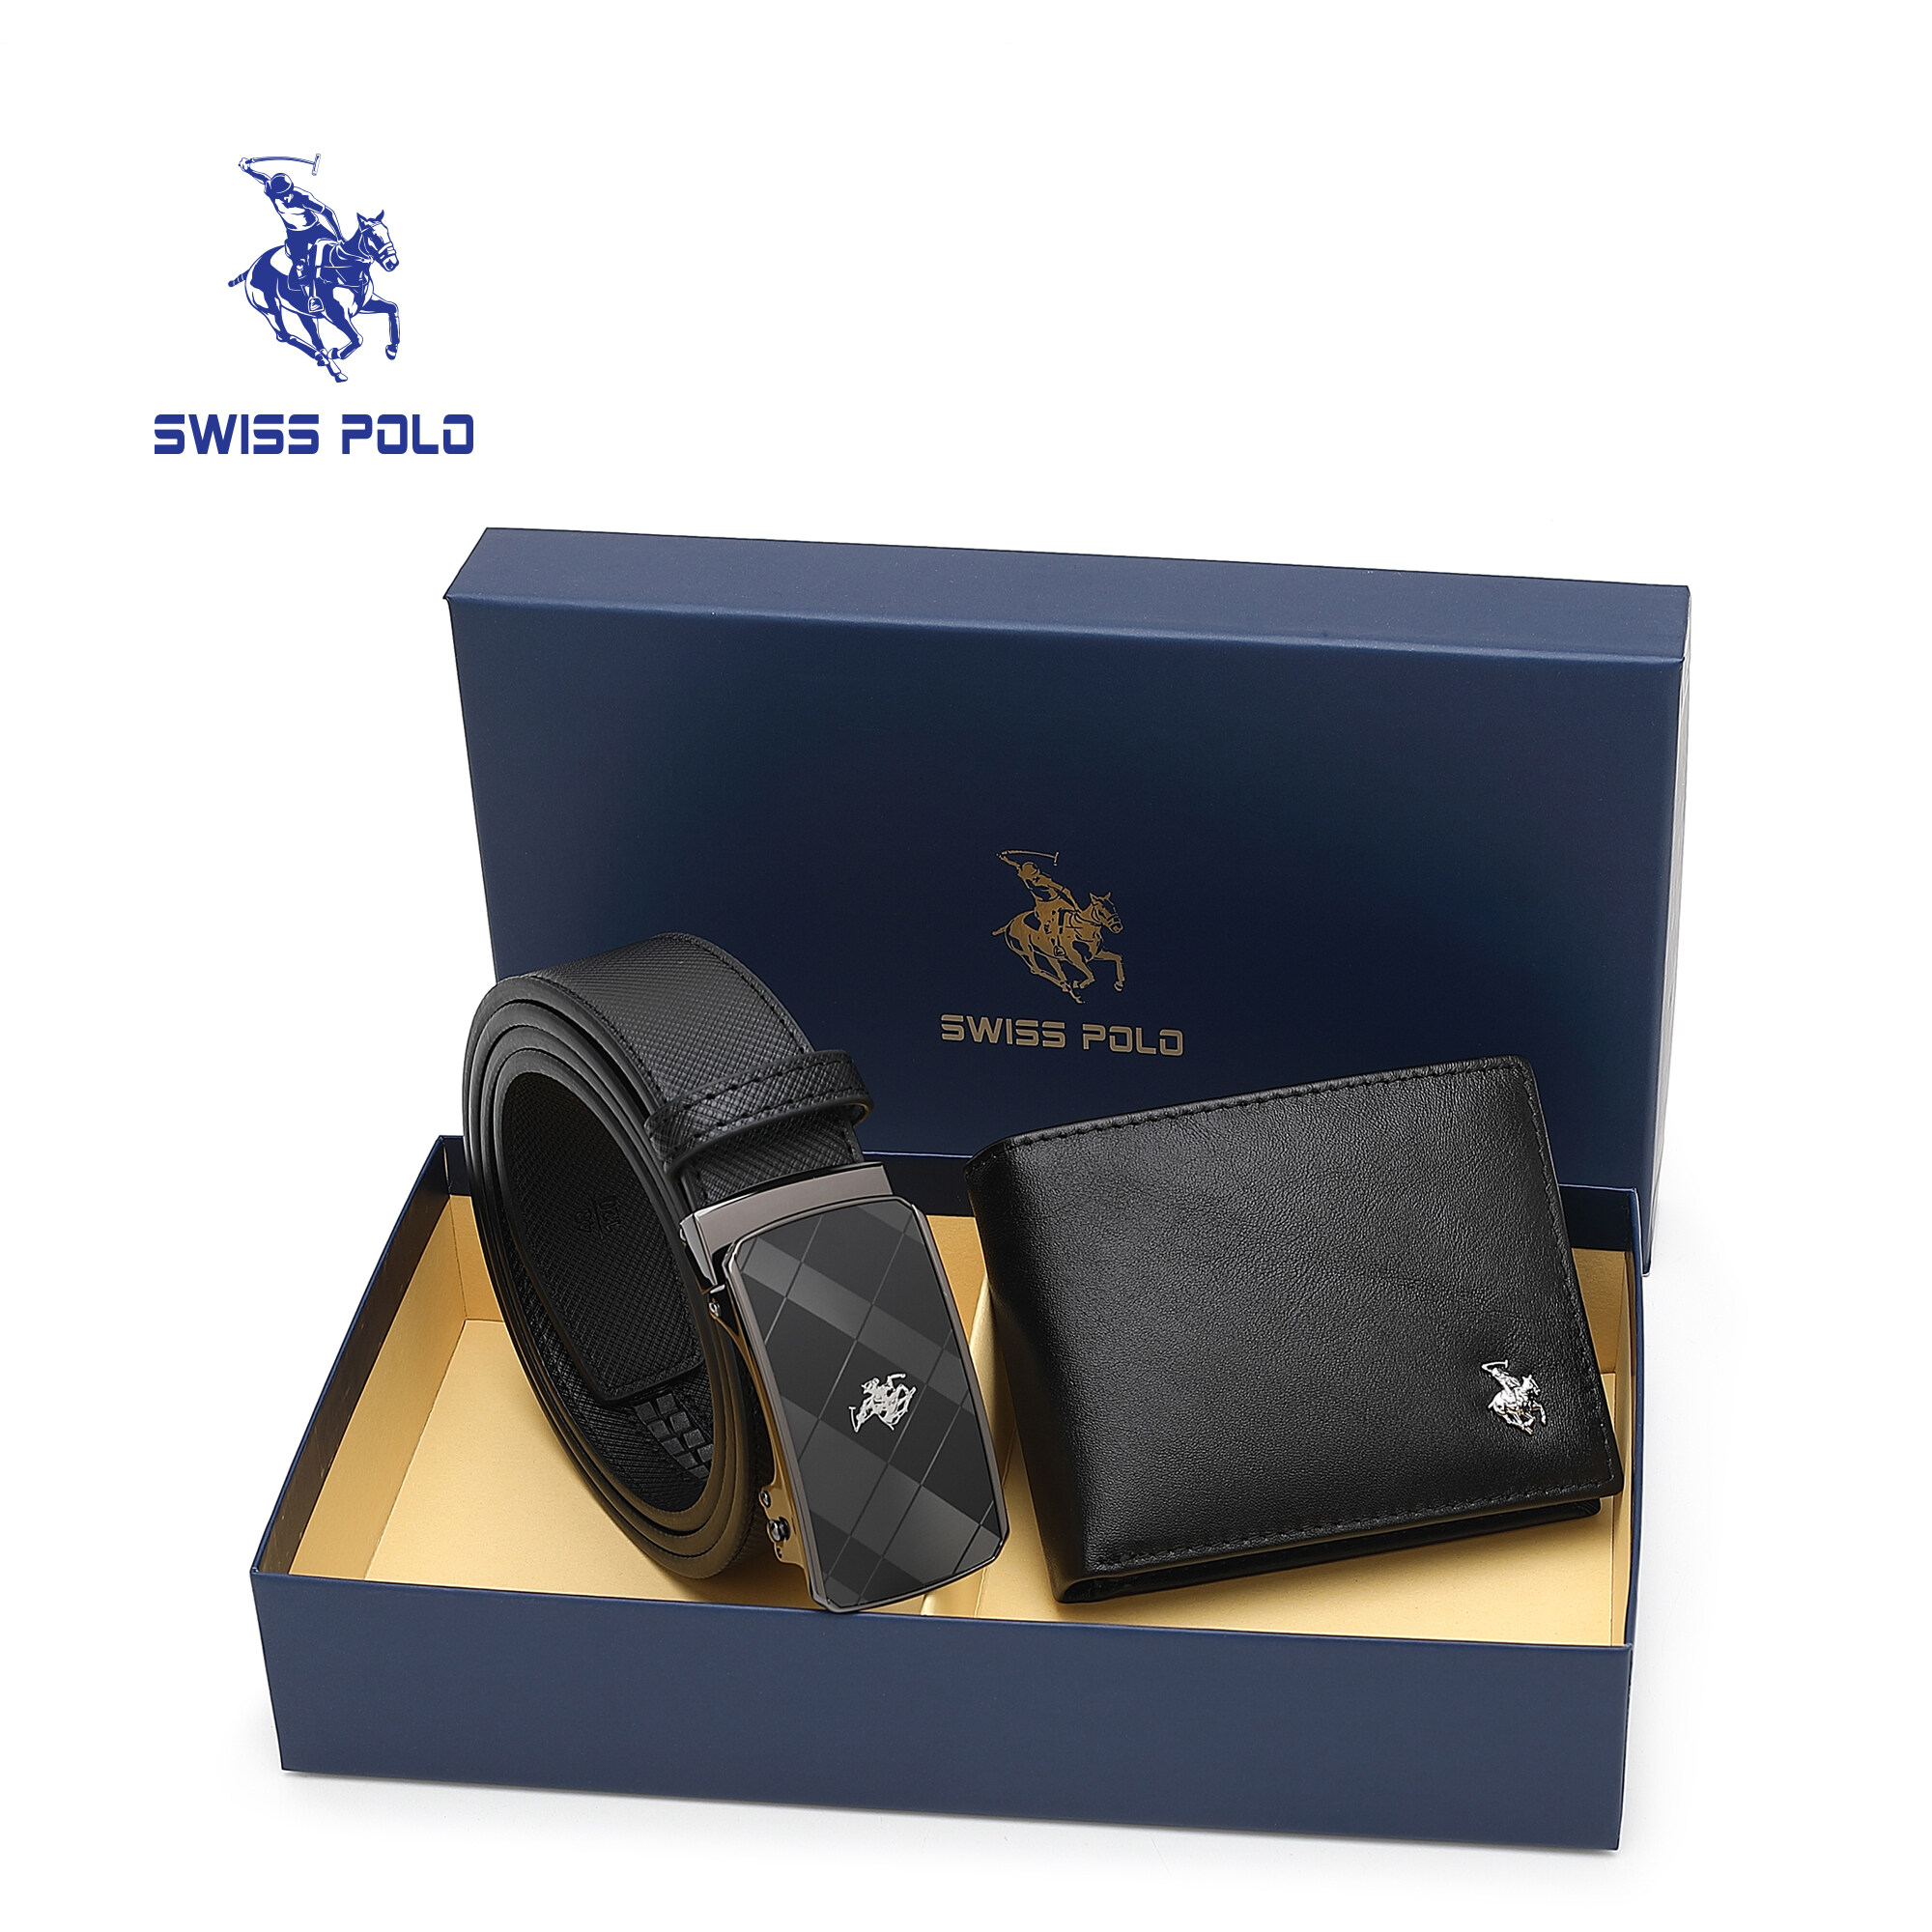 SWISS POLO Gift Set/ Box Wallet With Belt SGS 568-4 BLUE